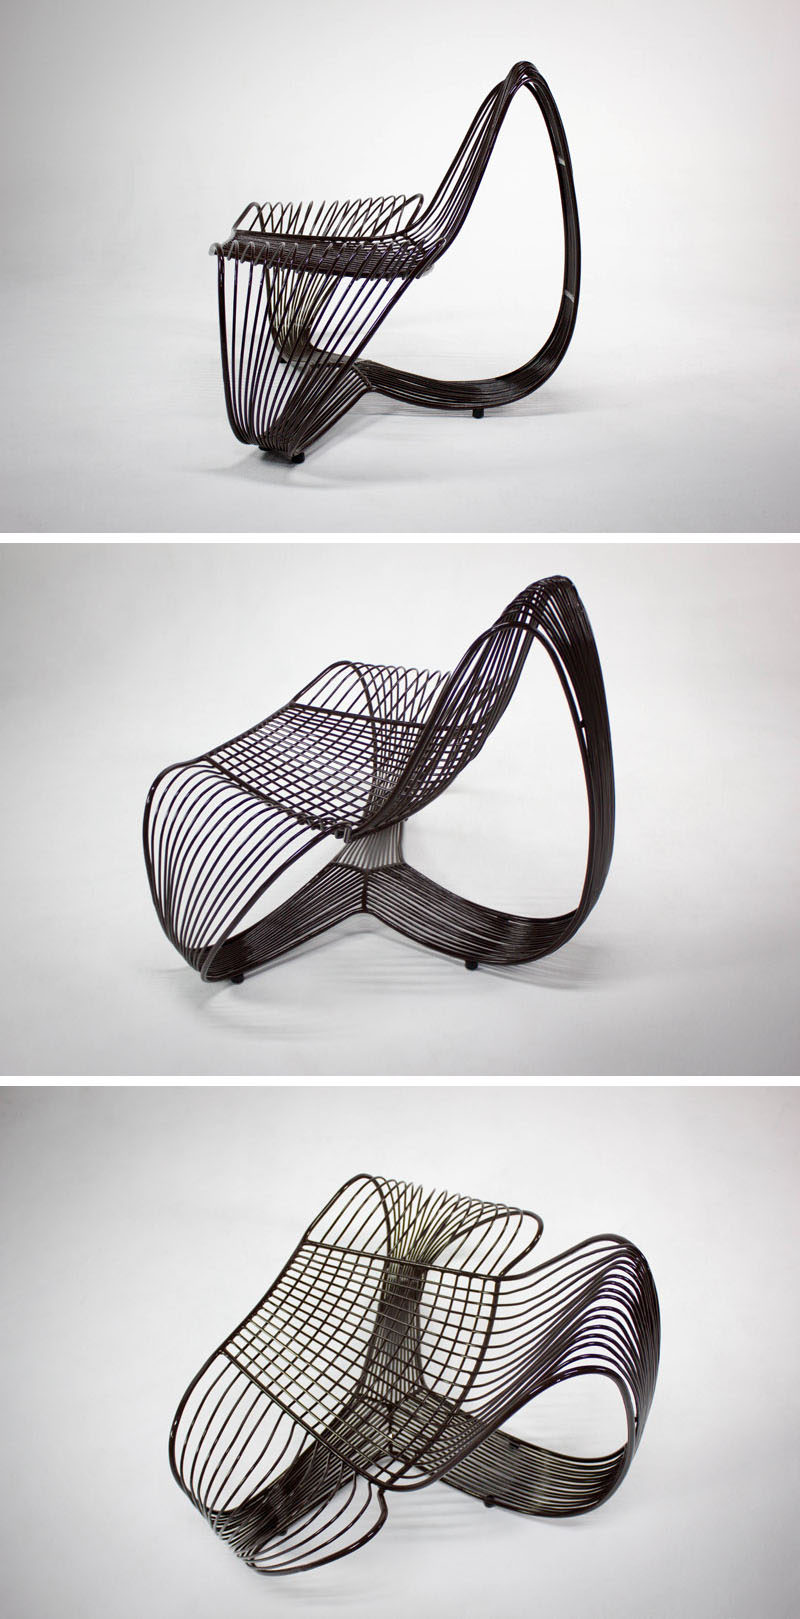 Ernesto Pastore has designed Conchita, a modern metal chair that was inspired by bivalve seashells and is made from stainless steel rods. #Design #Chair #Furniture